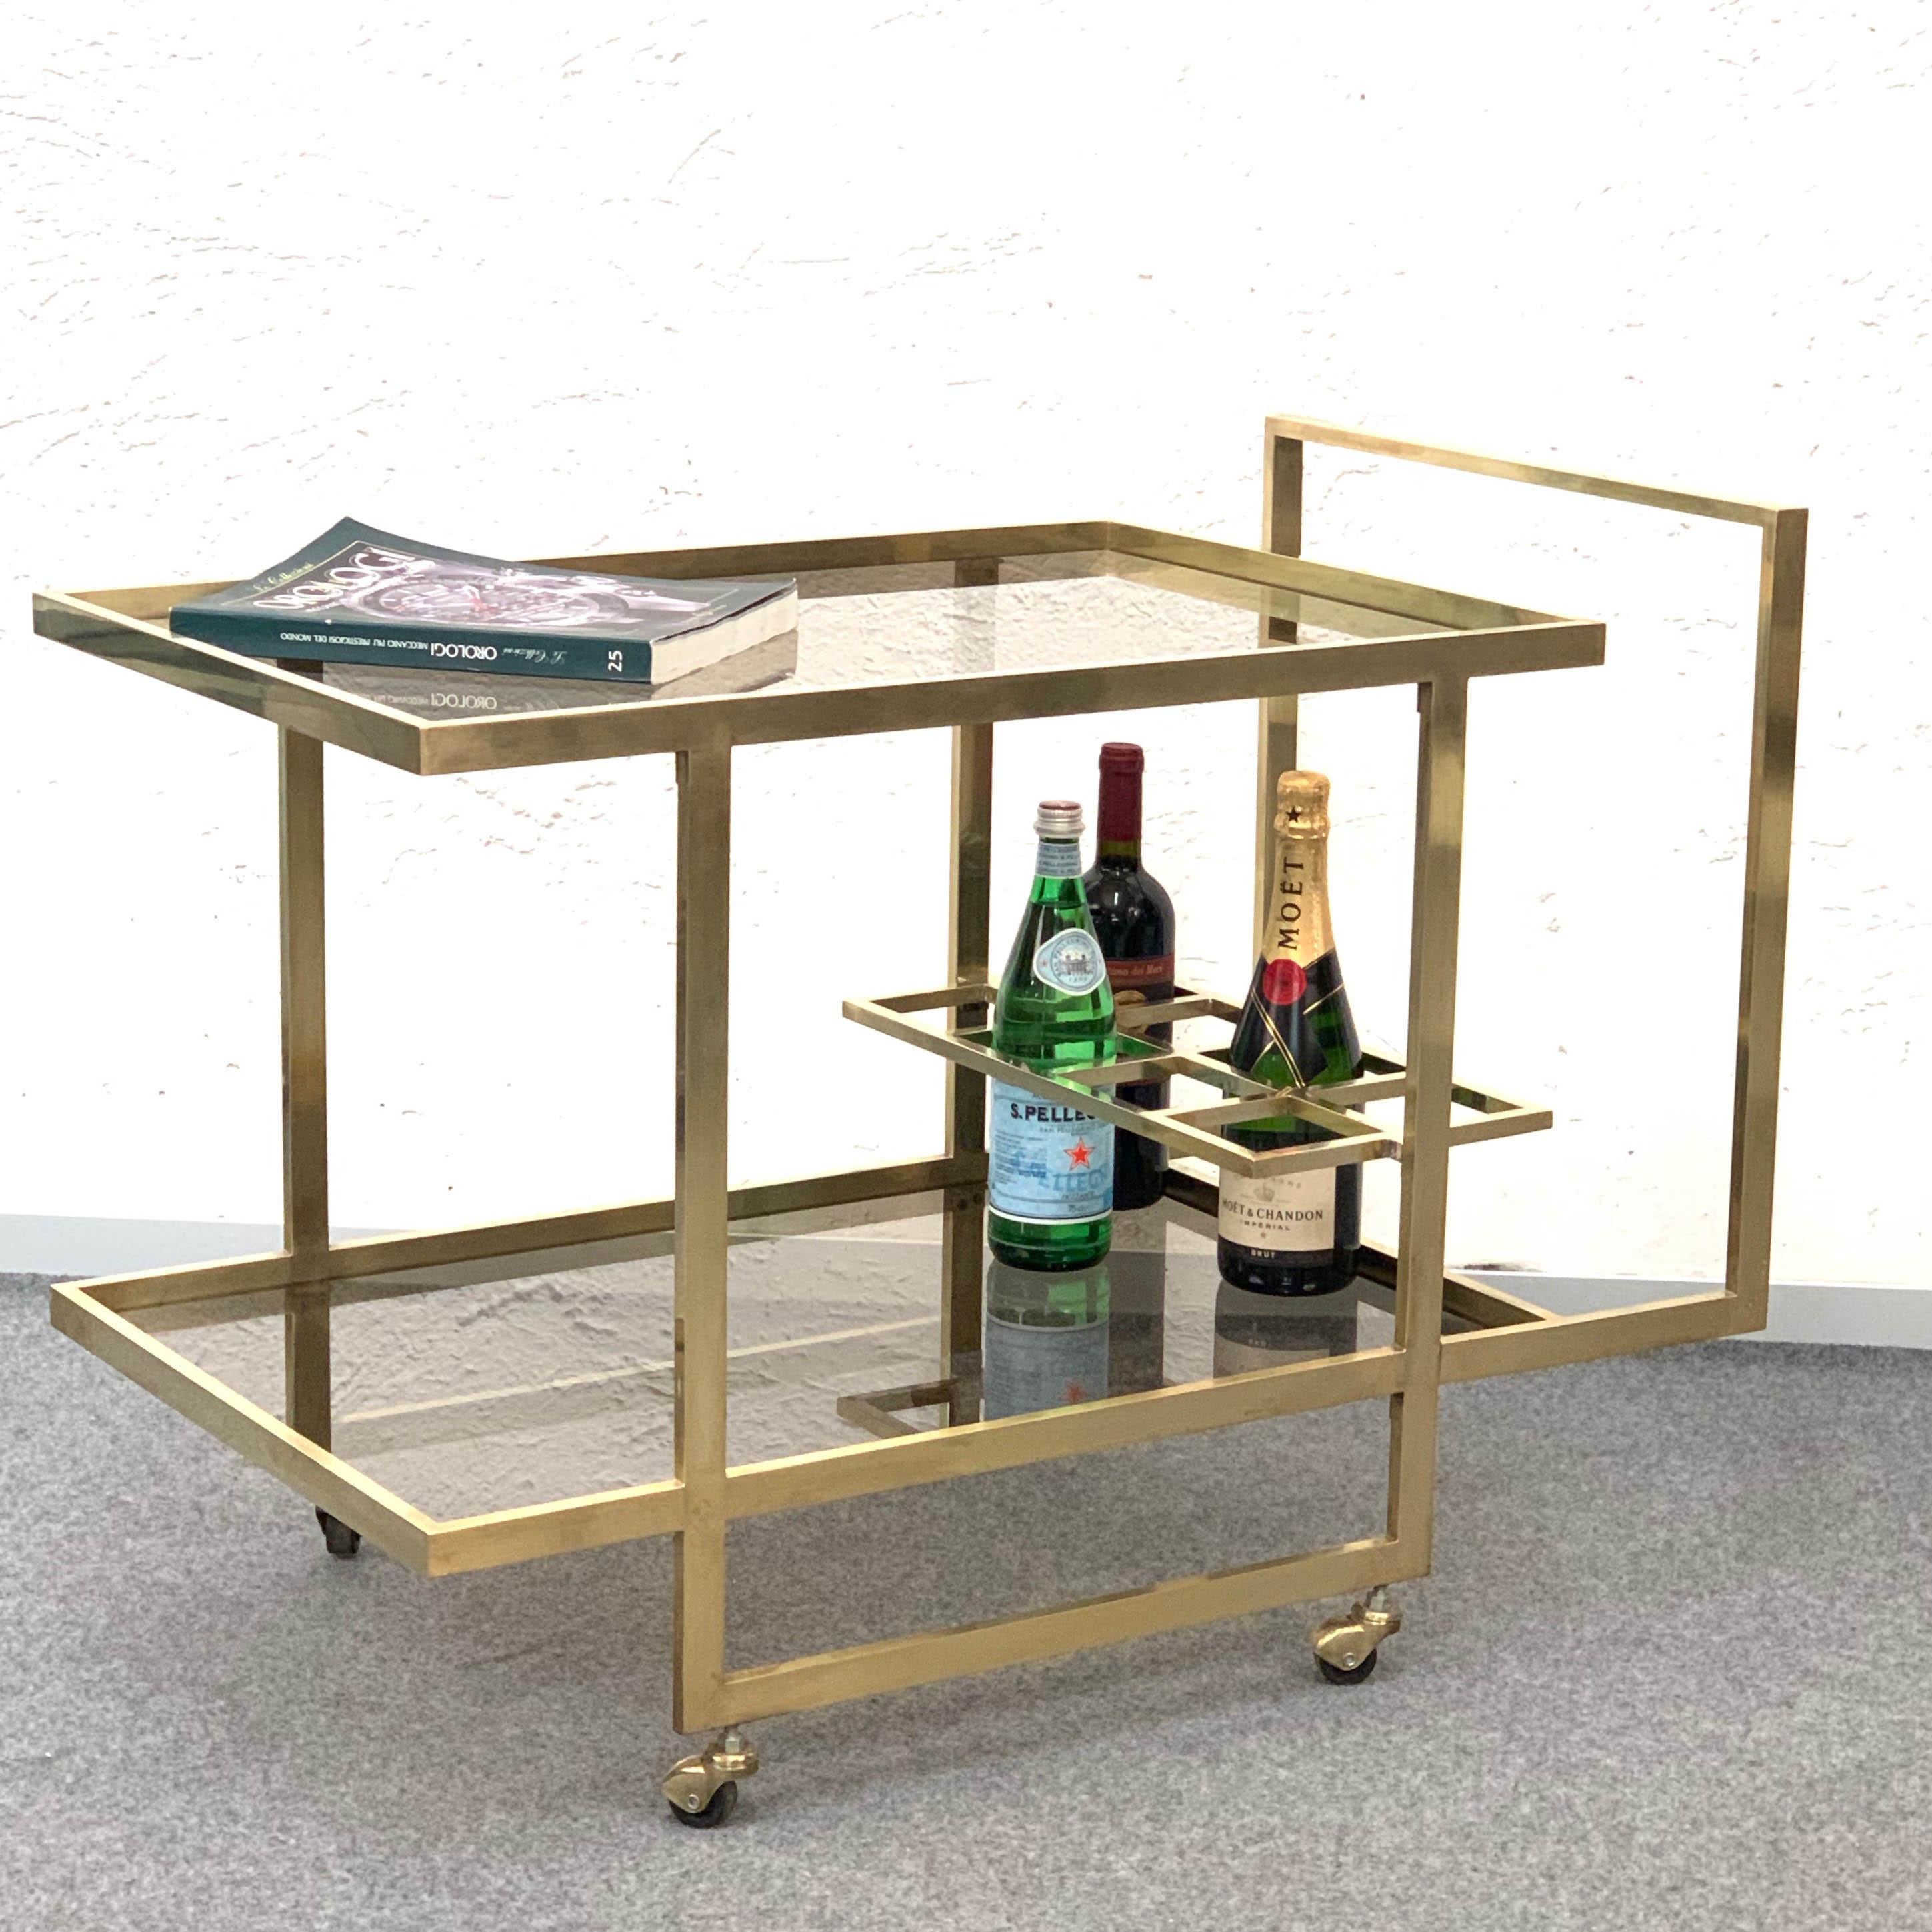 Midcentury Two Levels Smoked Glass and Brass Bar Cart with Bottle Holder, 1970s For Sale 1